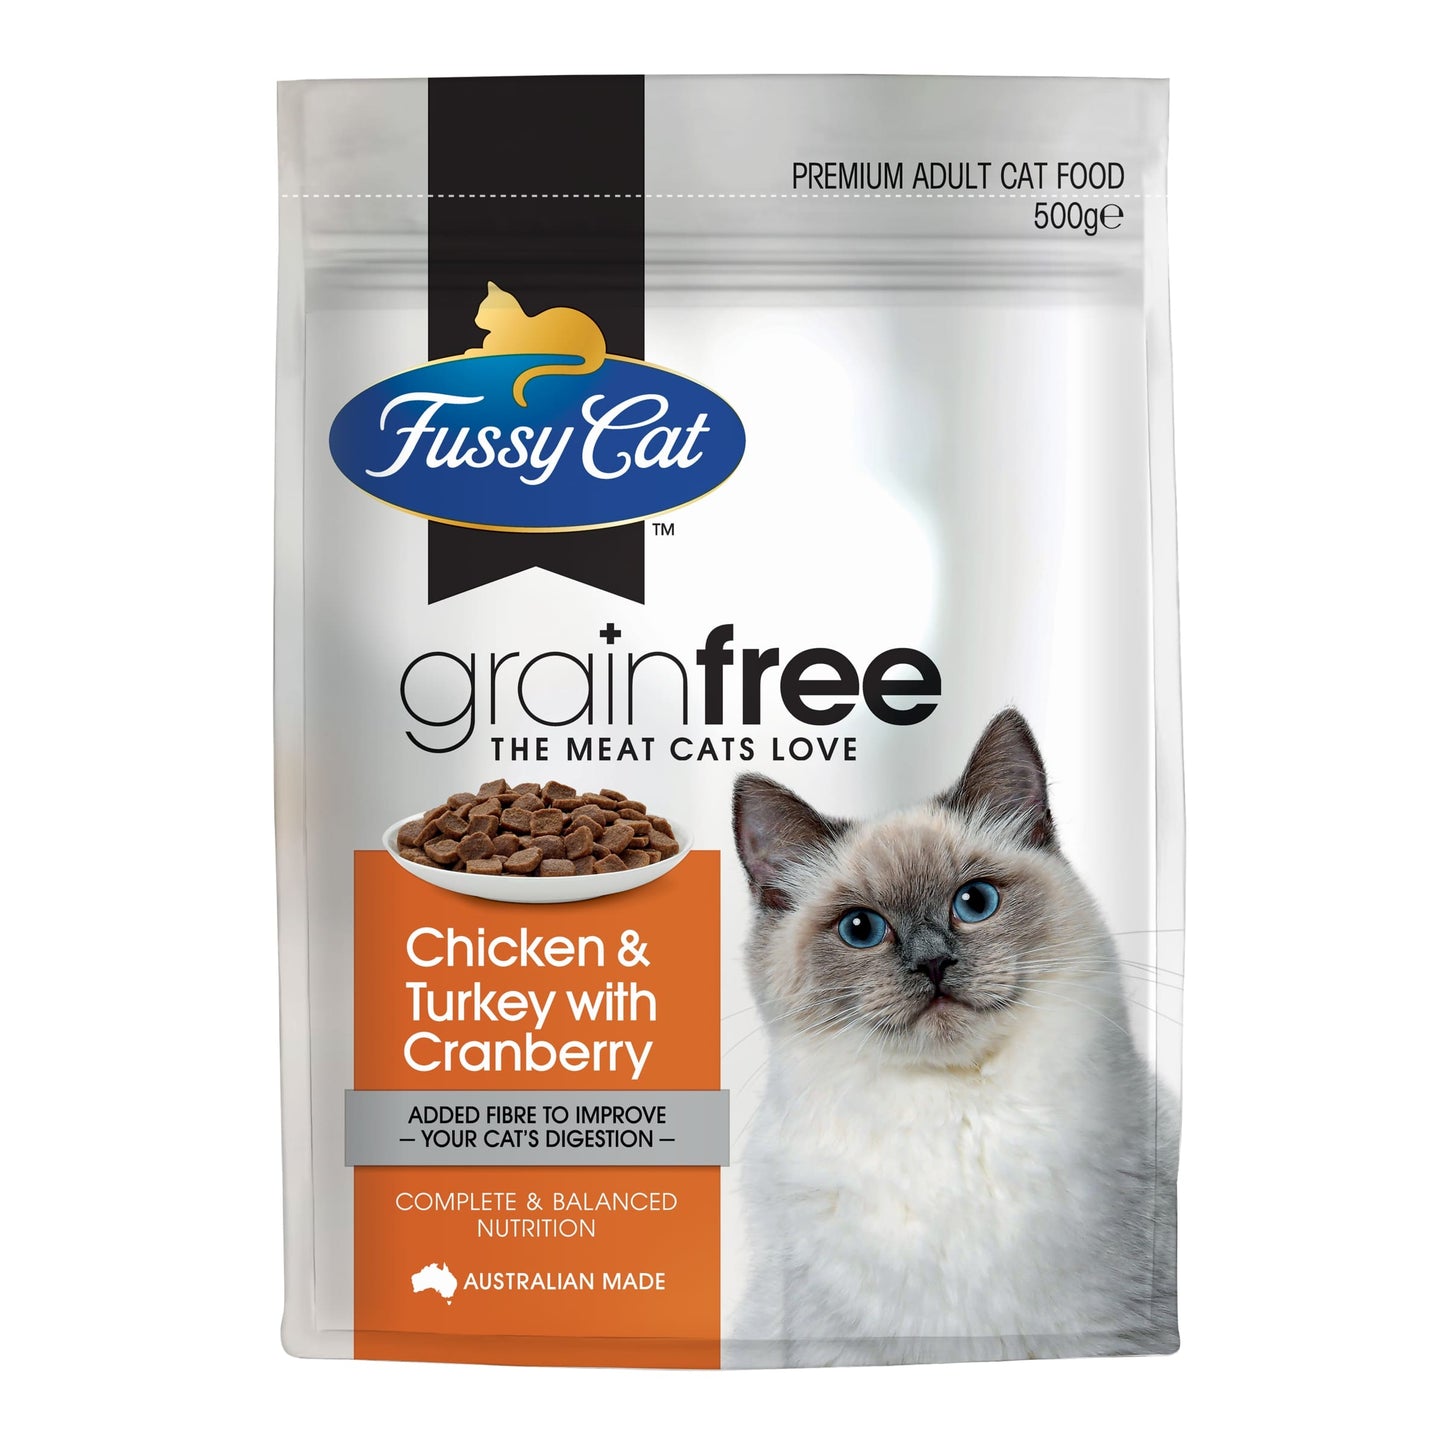 Fussy Cat Adult Grain Free Chicken & Turkey with Cranberry 500g x 6